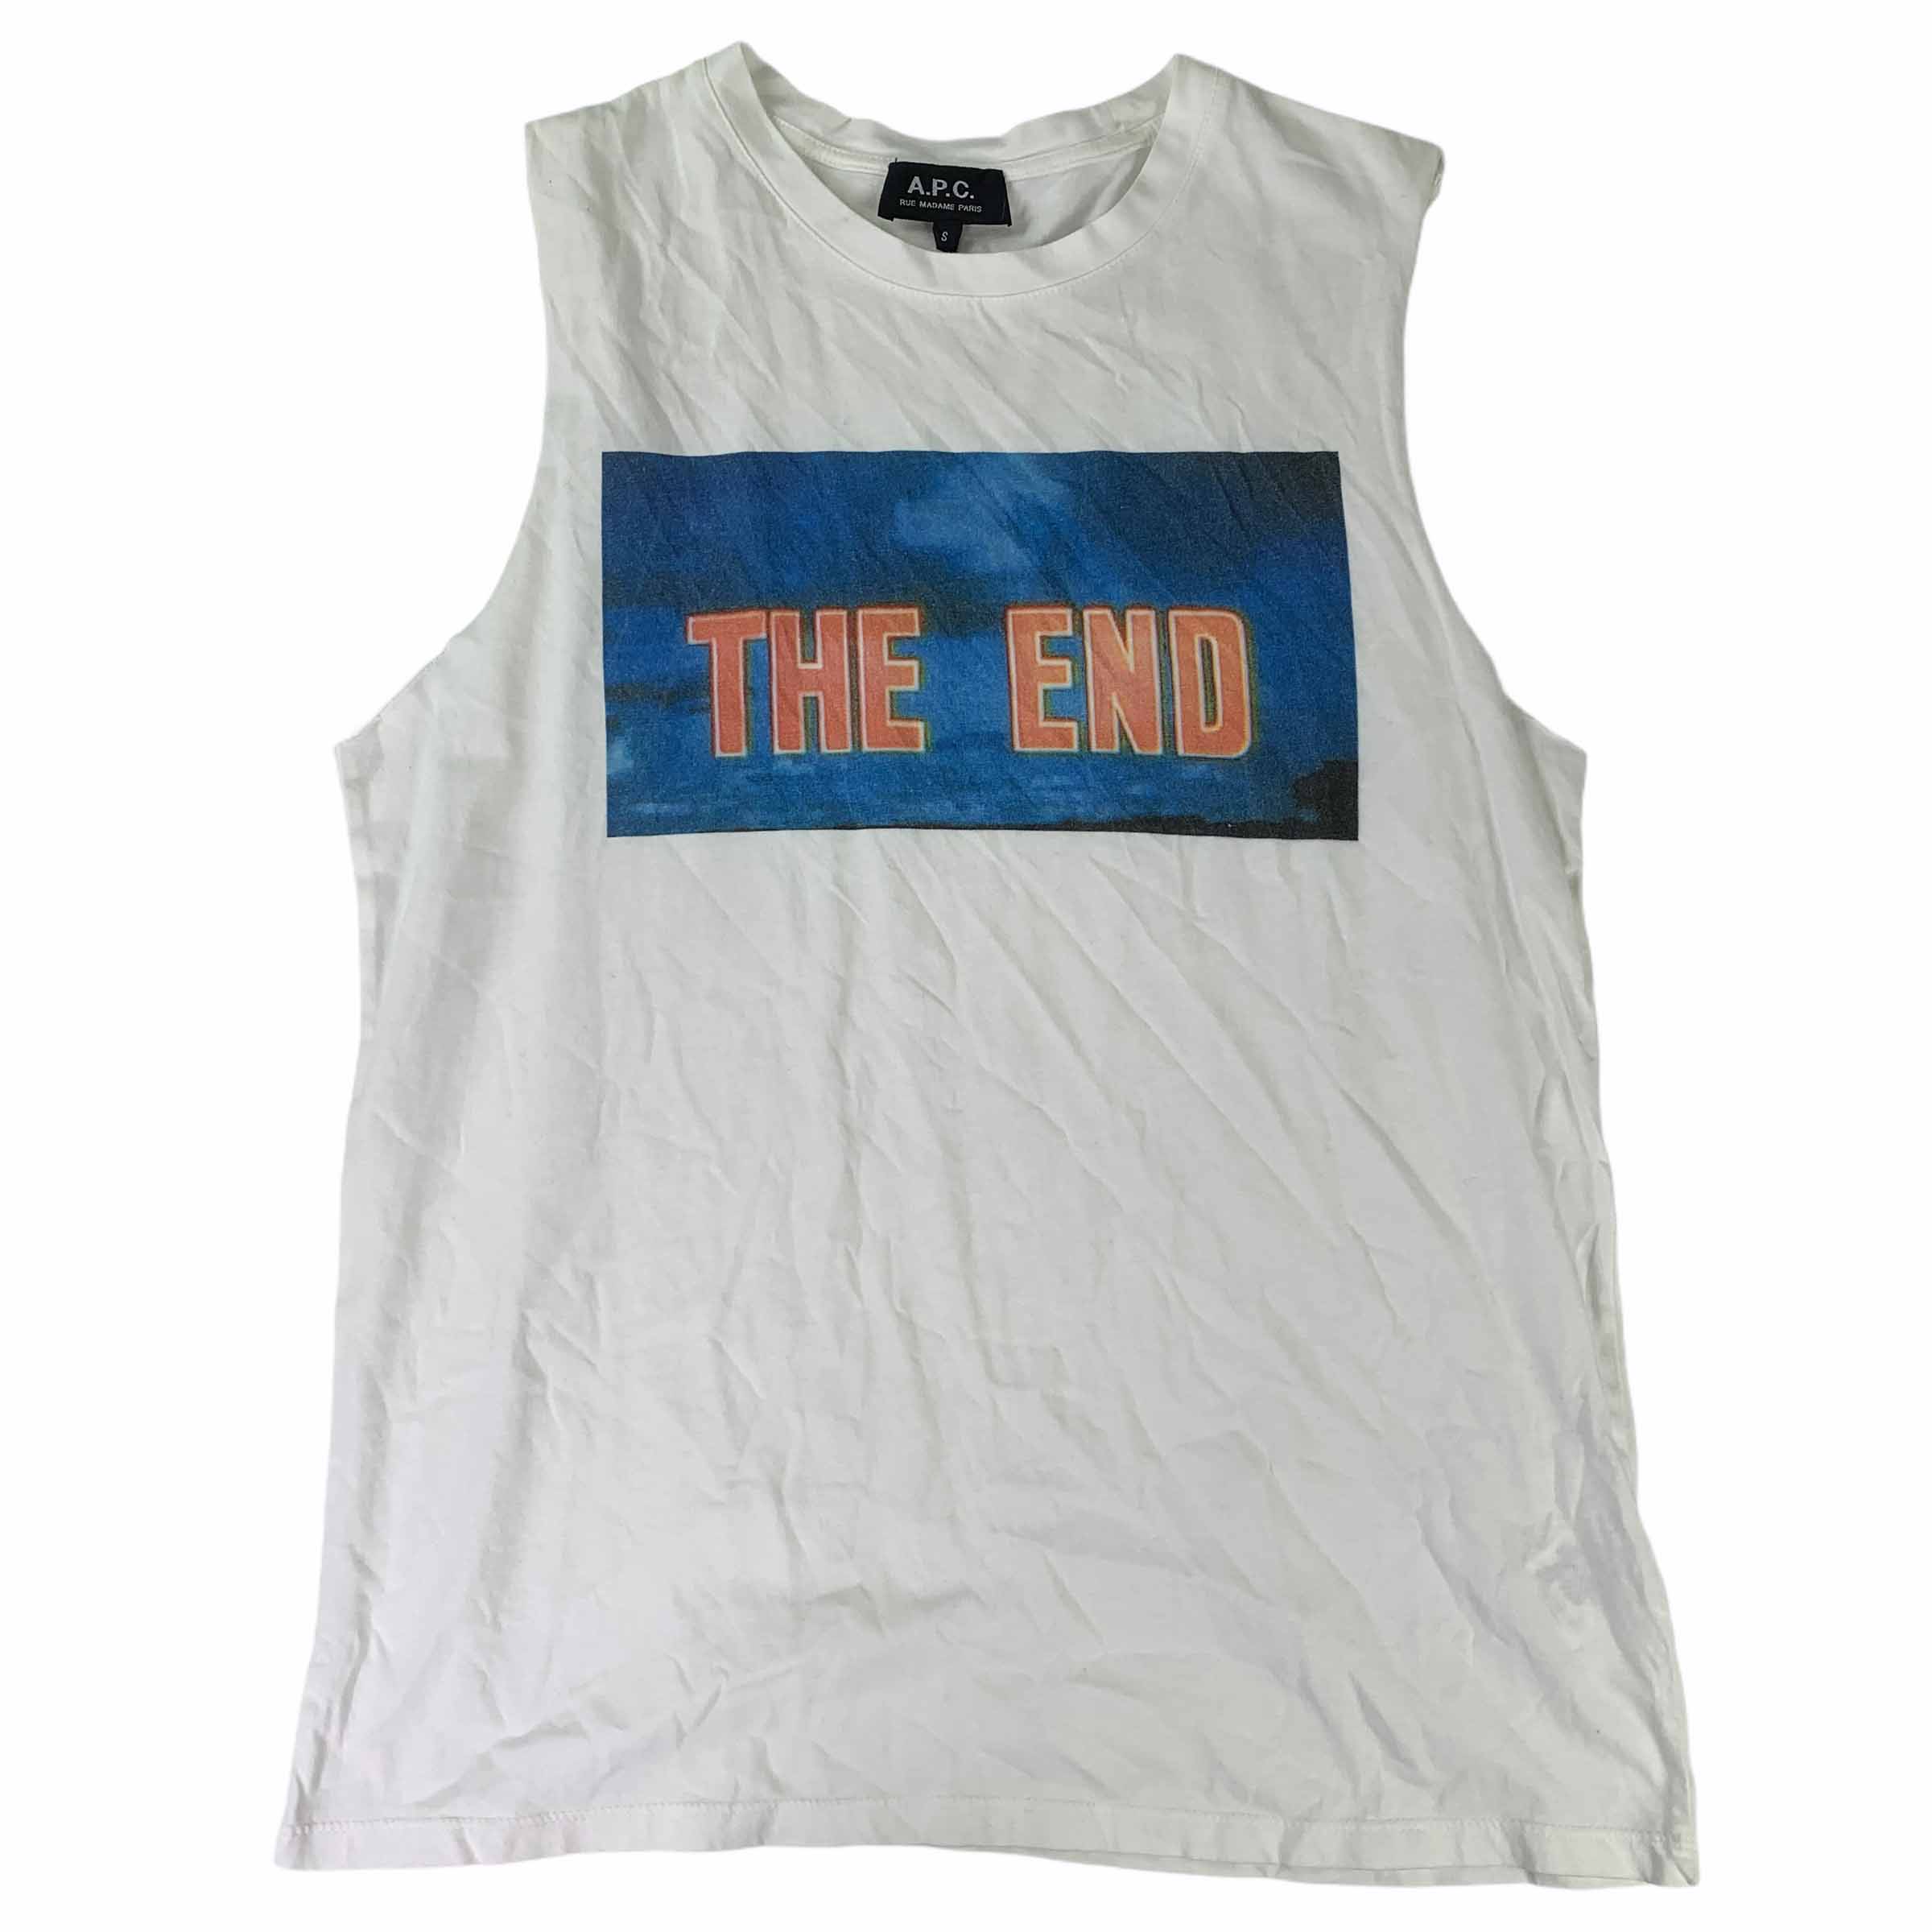 [A.P.C] The end logo Sleeveless - Size S